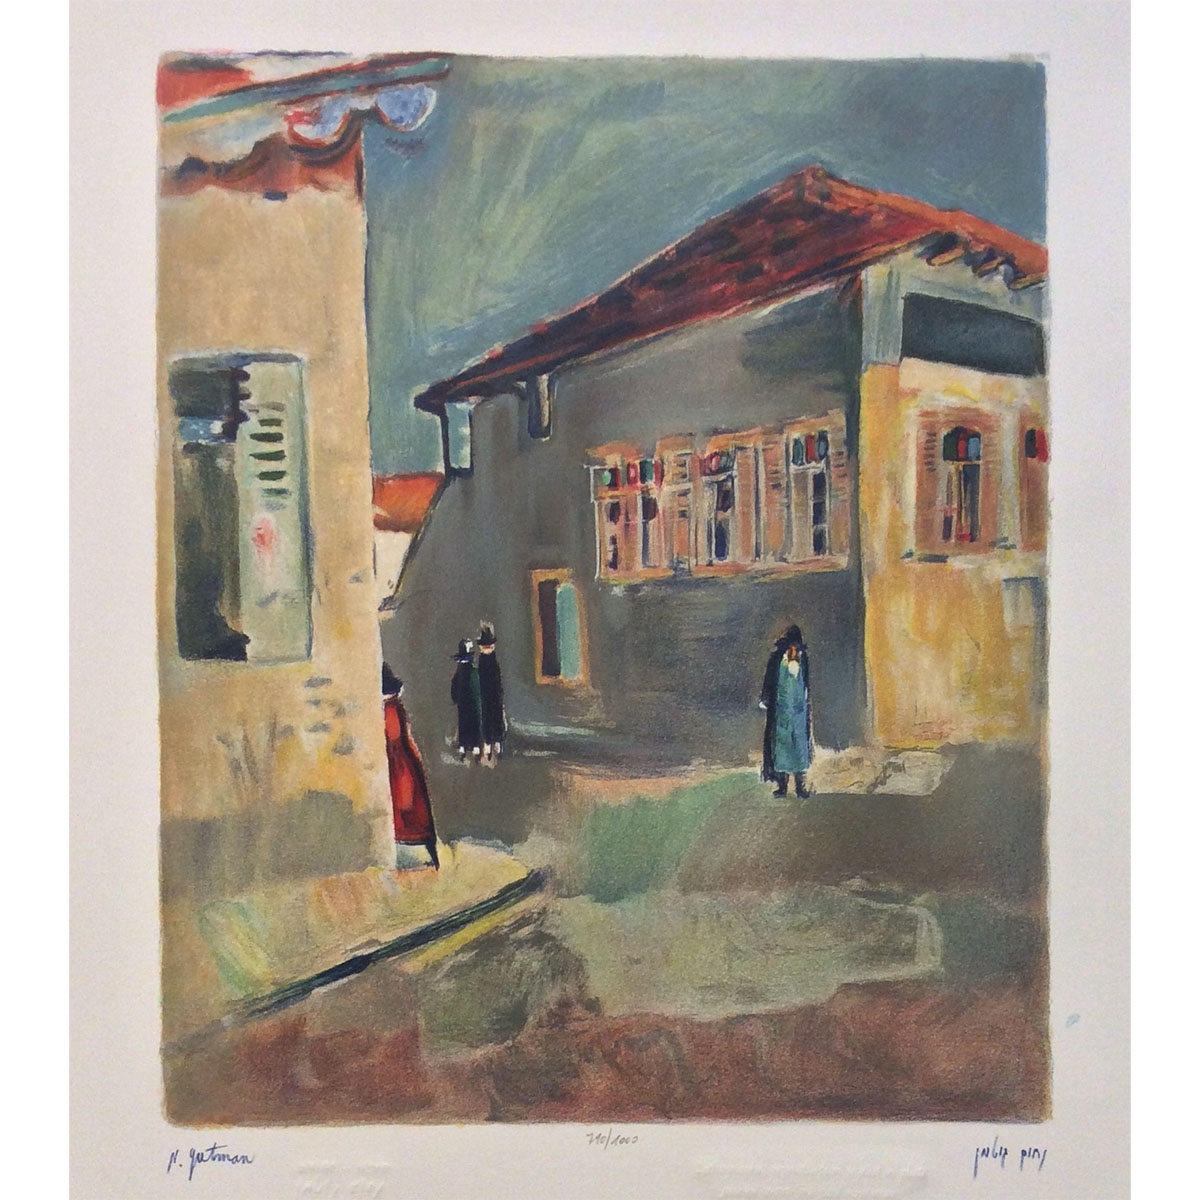  Chabad Synagogue. Artist: Nahum Gutman. Signed & Numbered Limited Edition Lithograph - 1